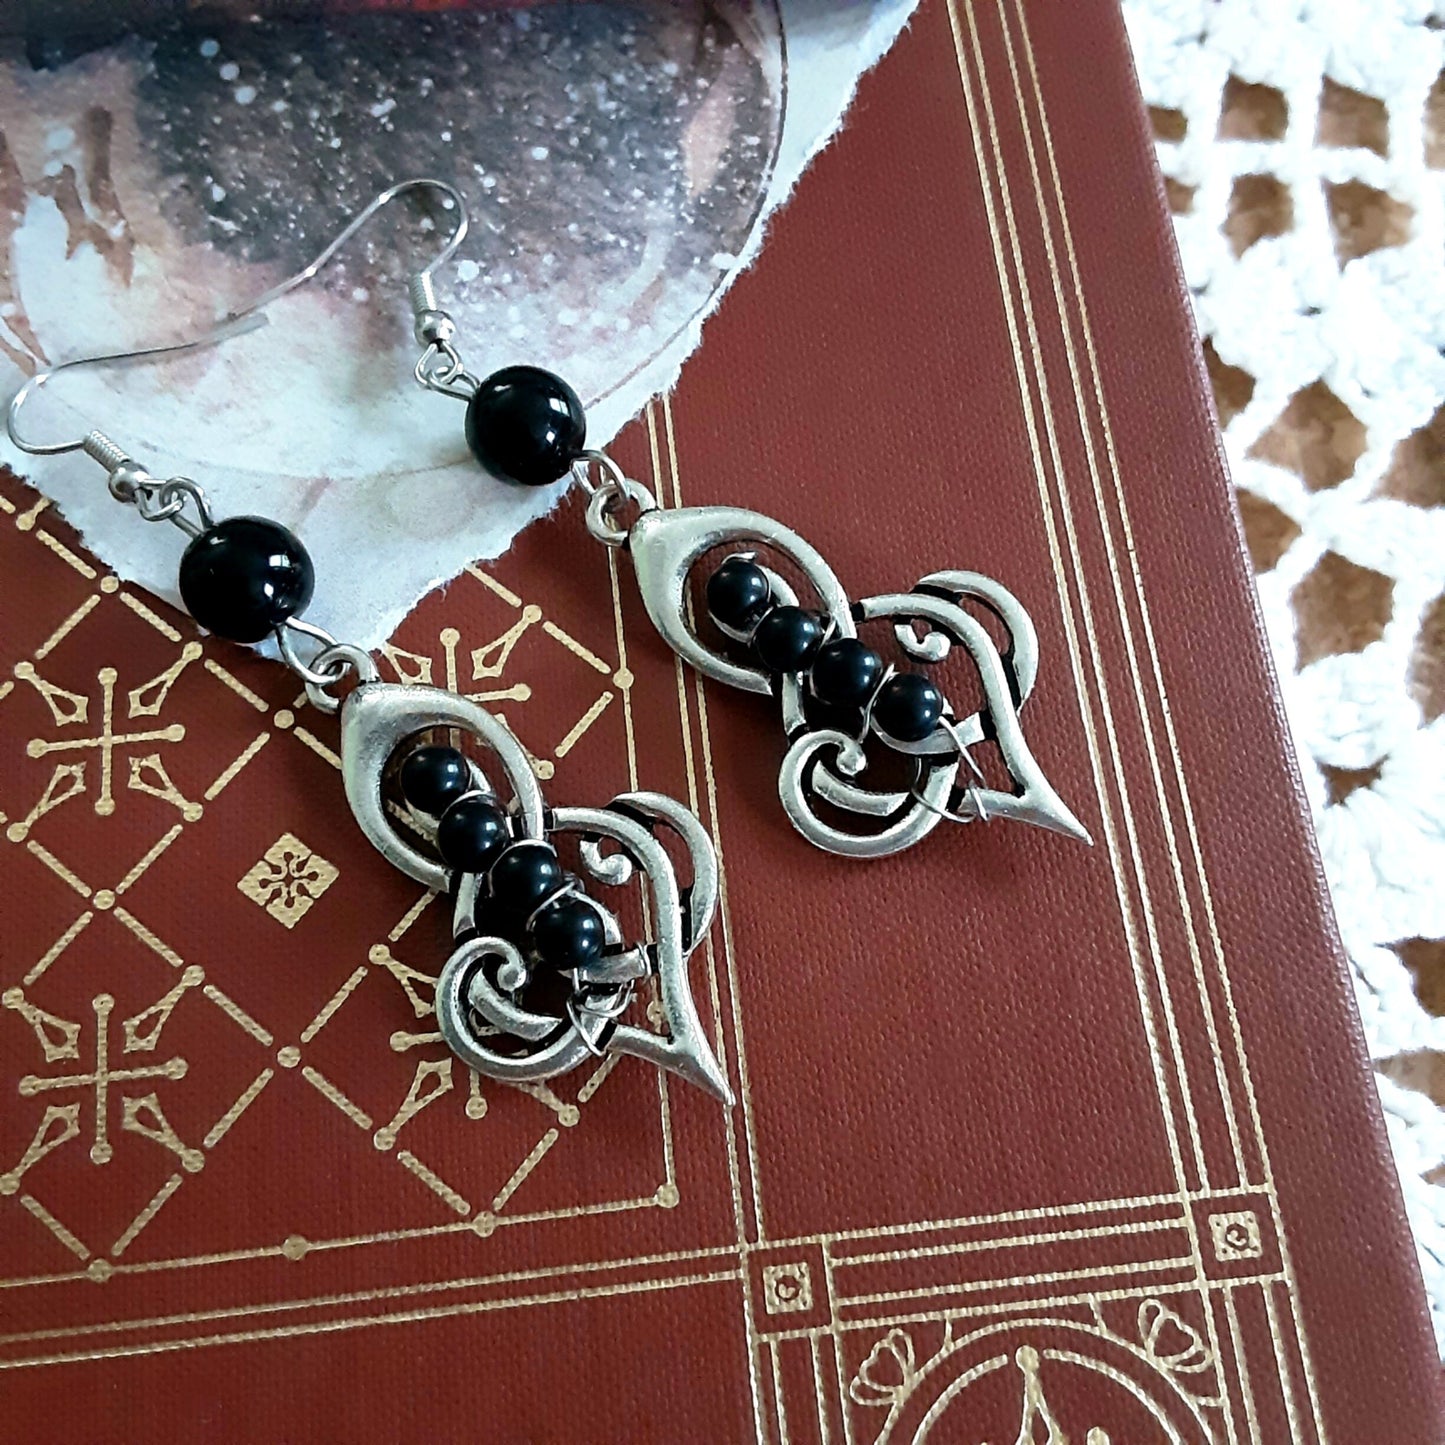 Celtic knotwork earrings with Obsidian bead detailing Protection Magic long Witchy earrings